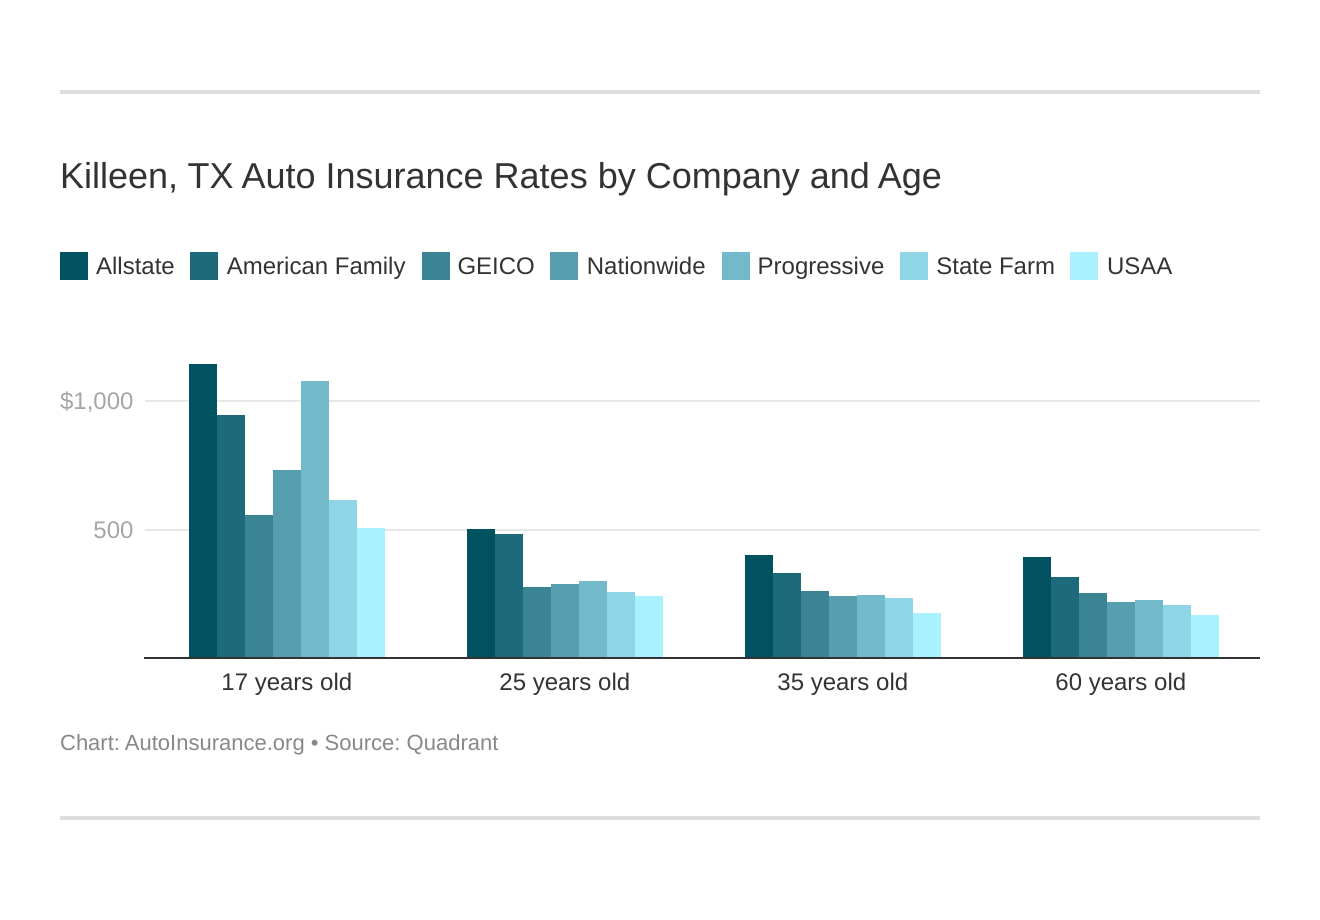 Killeen, TX Auto Insurance Rates by Company and Age